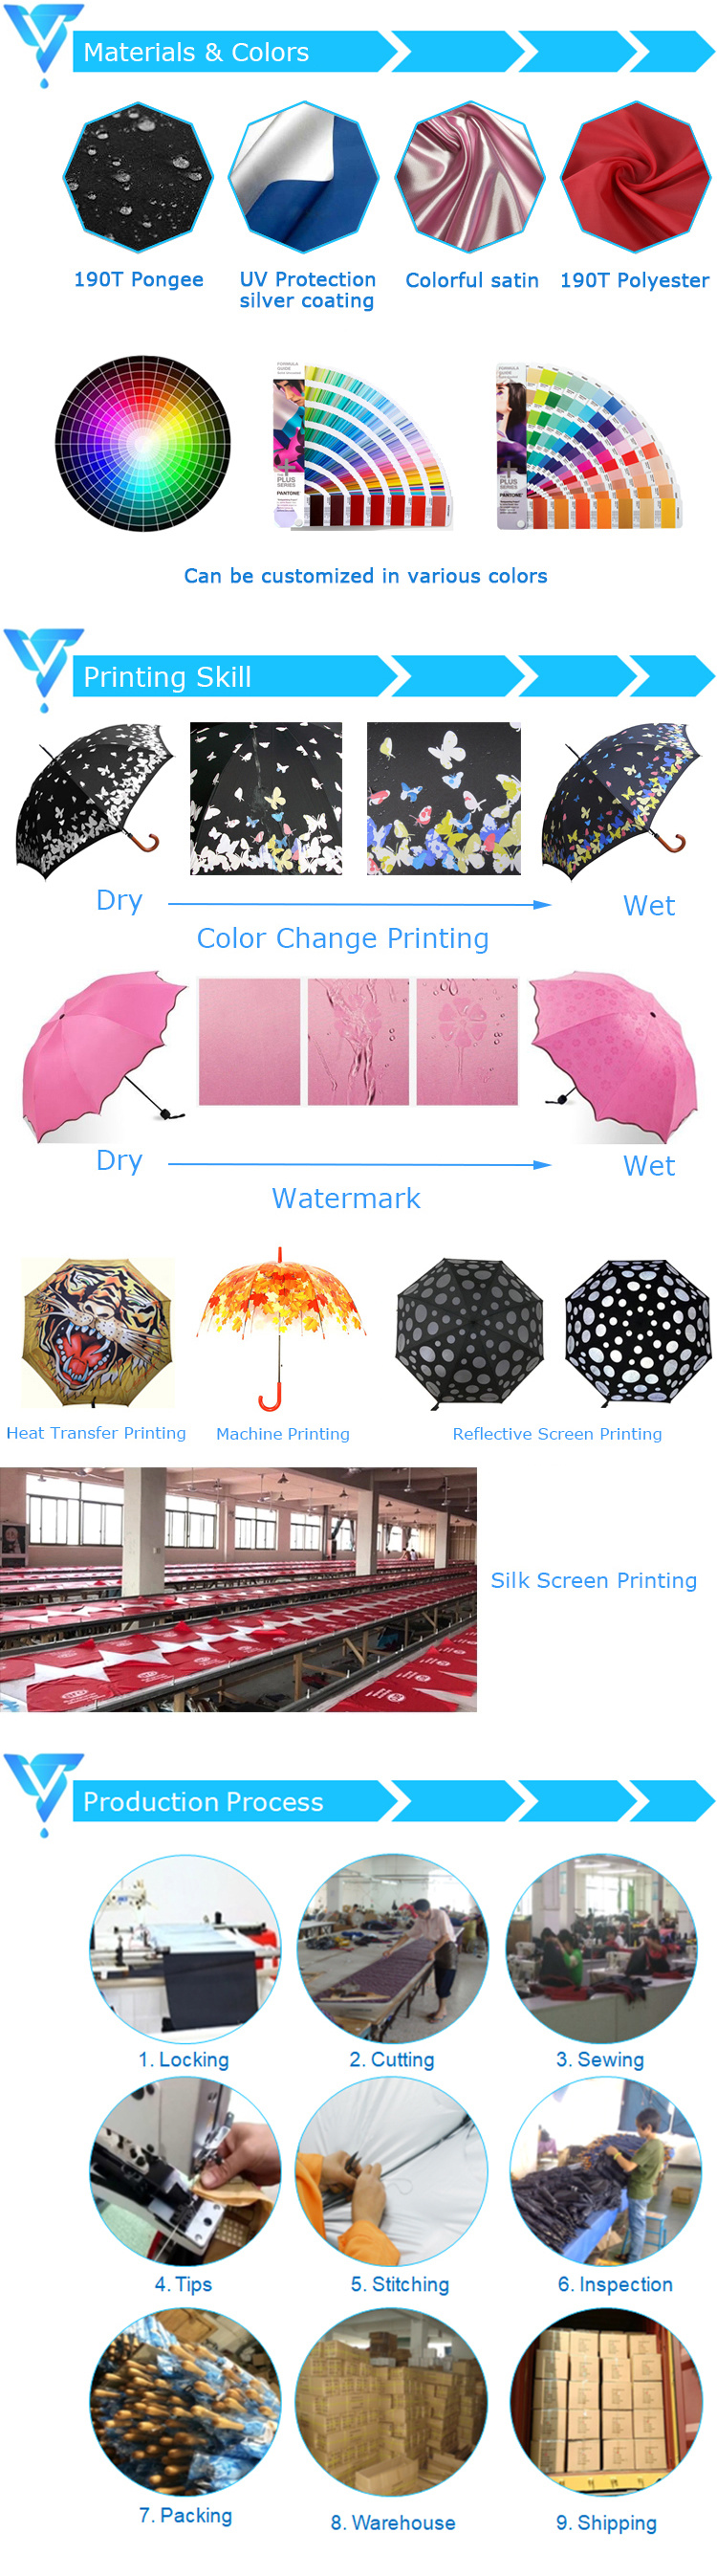 Eye Catching Design Perfectly Dimensioned Stay Dry Elegently Block The Rain Umbrella